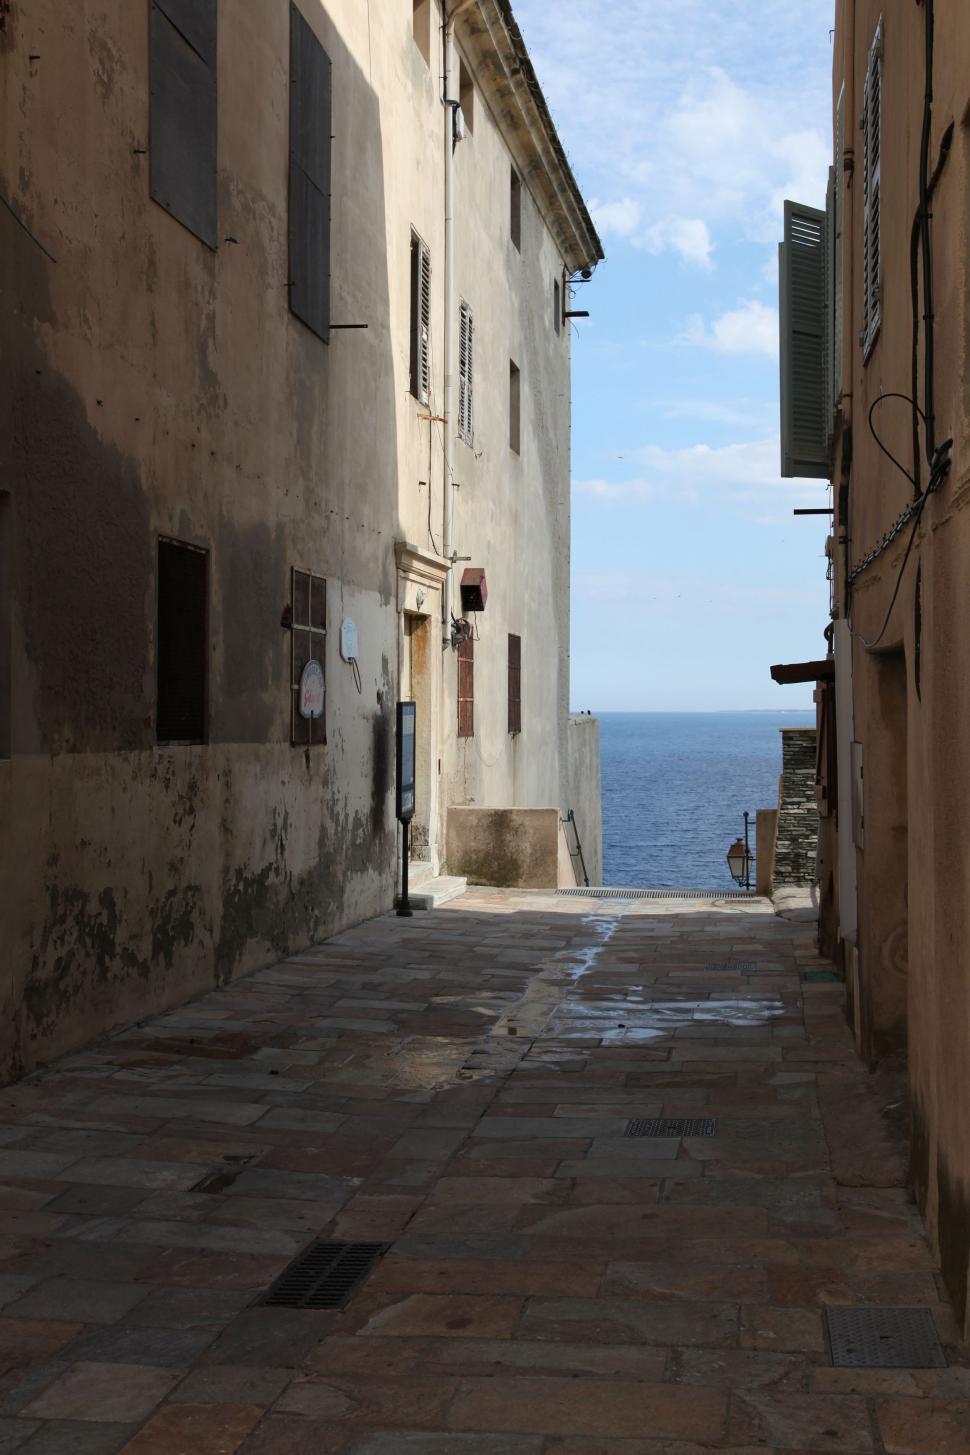 Free Image of Narrow Alley Way With a View of the Ocean 